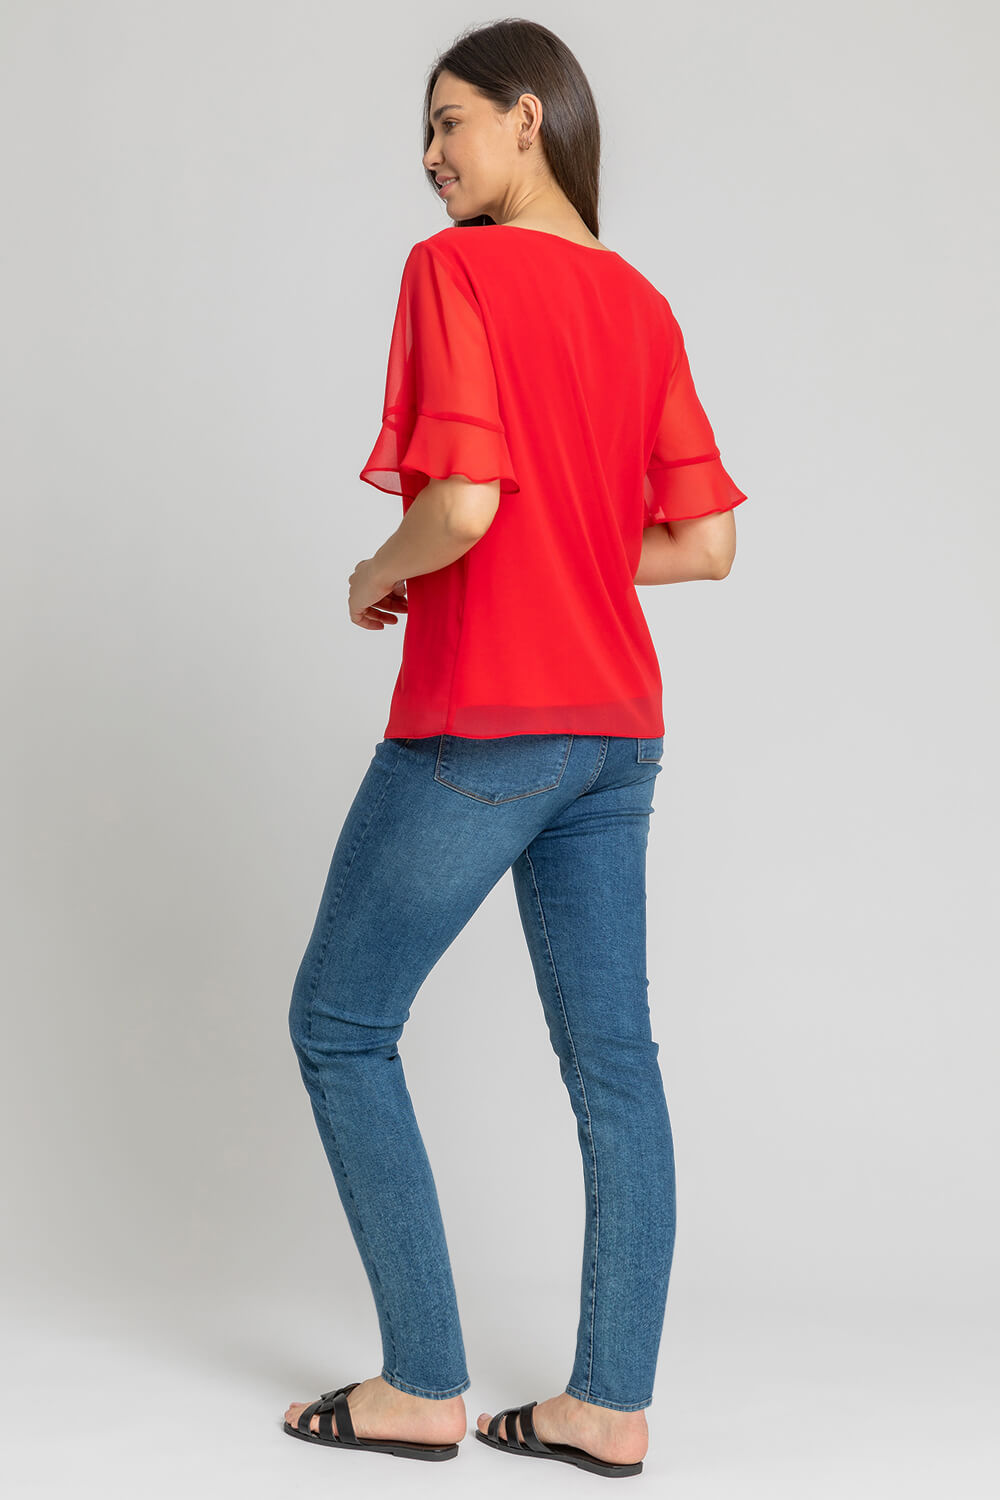 Red Plain Frill Detail Chiffon Top, Image 2 of 4